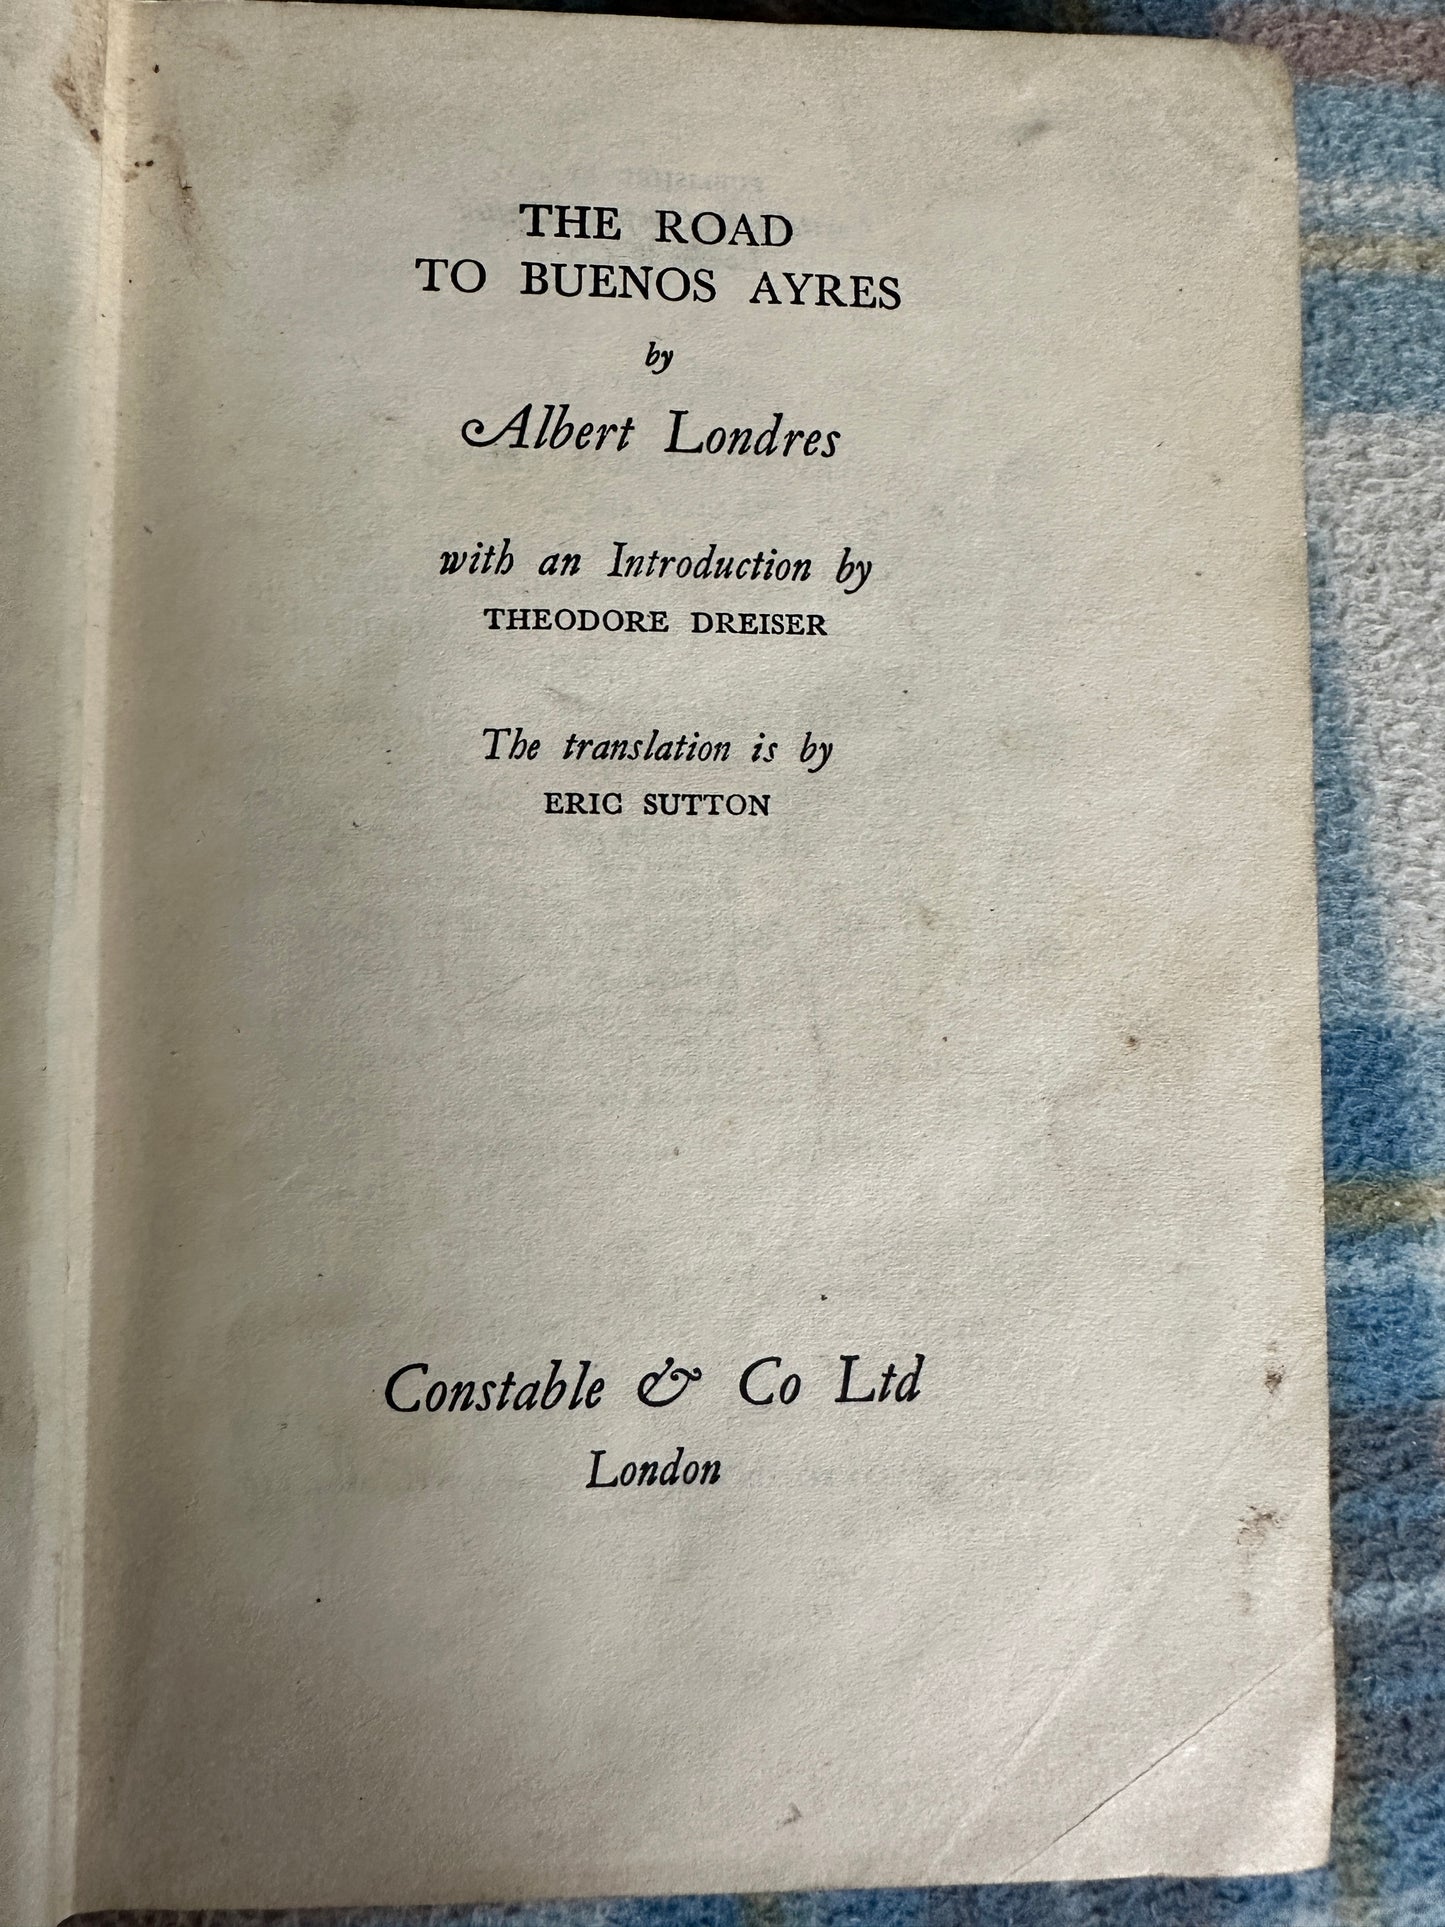 1940 The Road To Buenos Ayres - Albert Londres(Constable & Co Ltd)